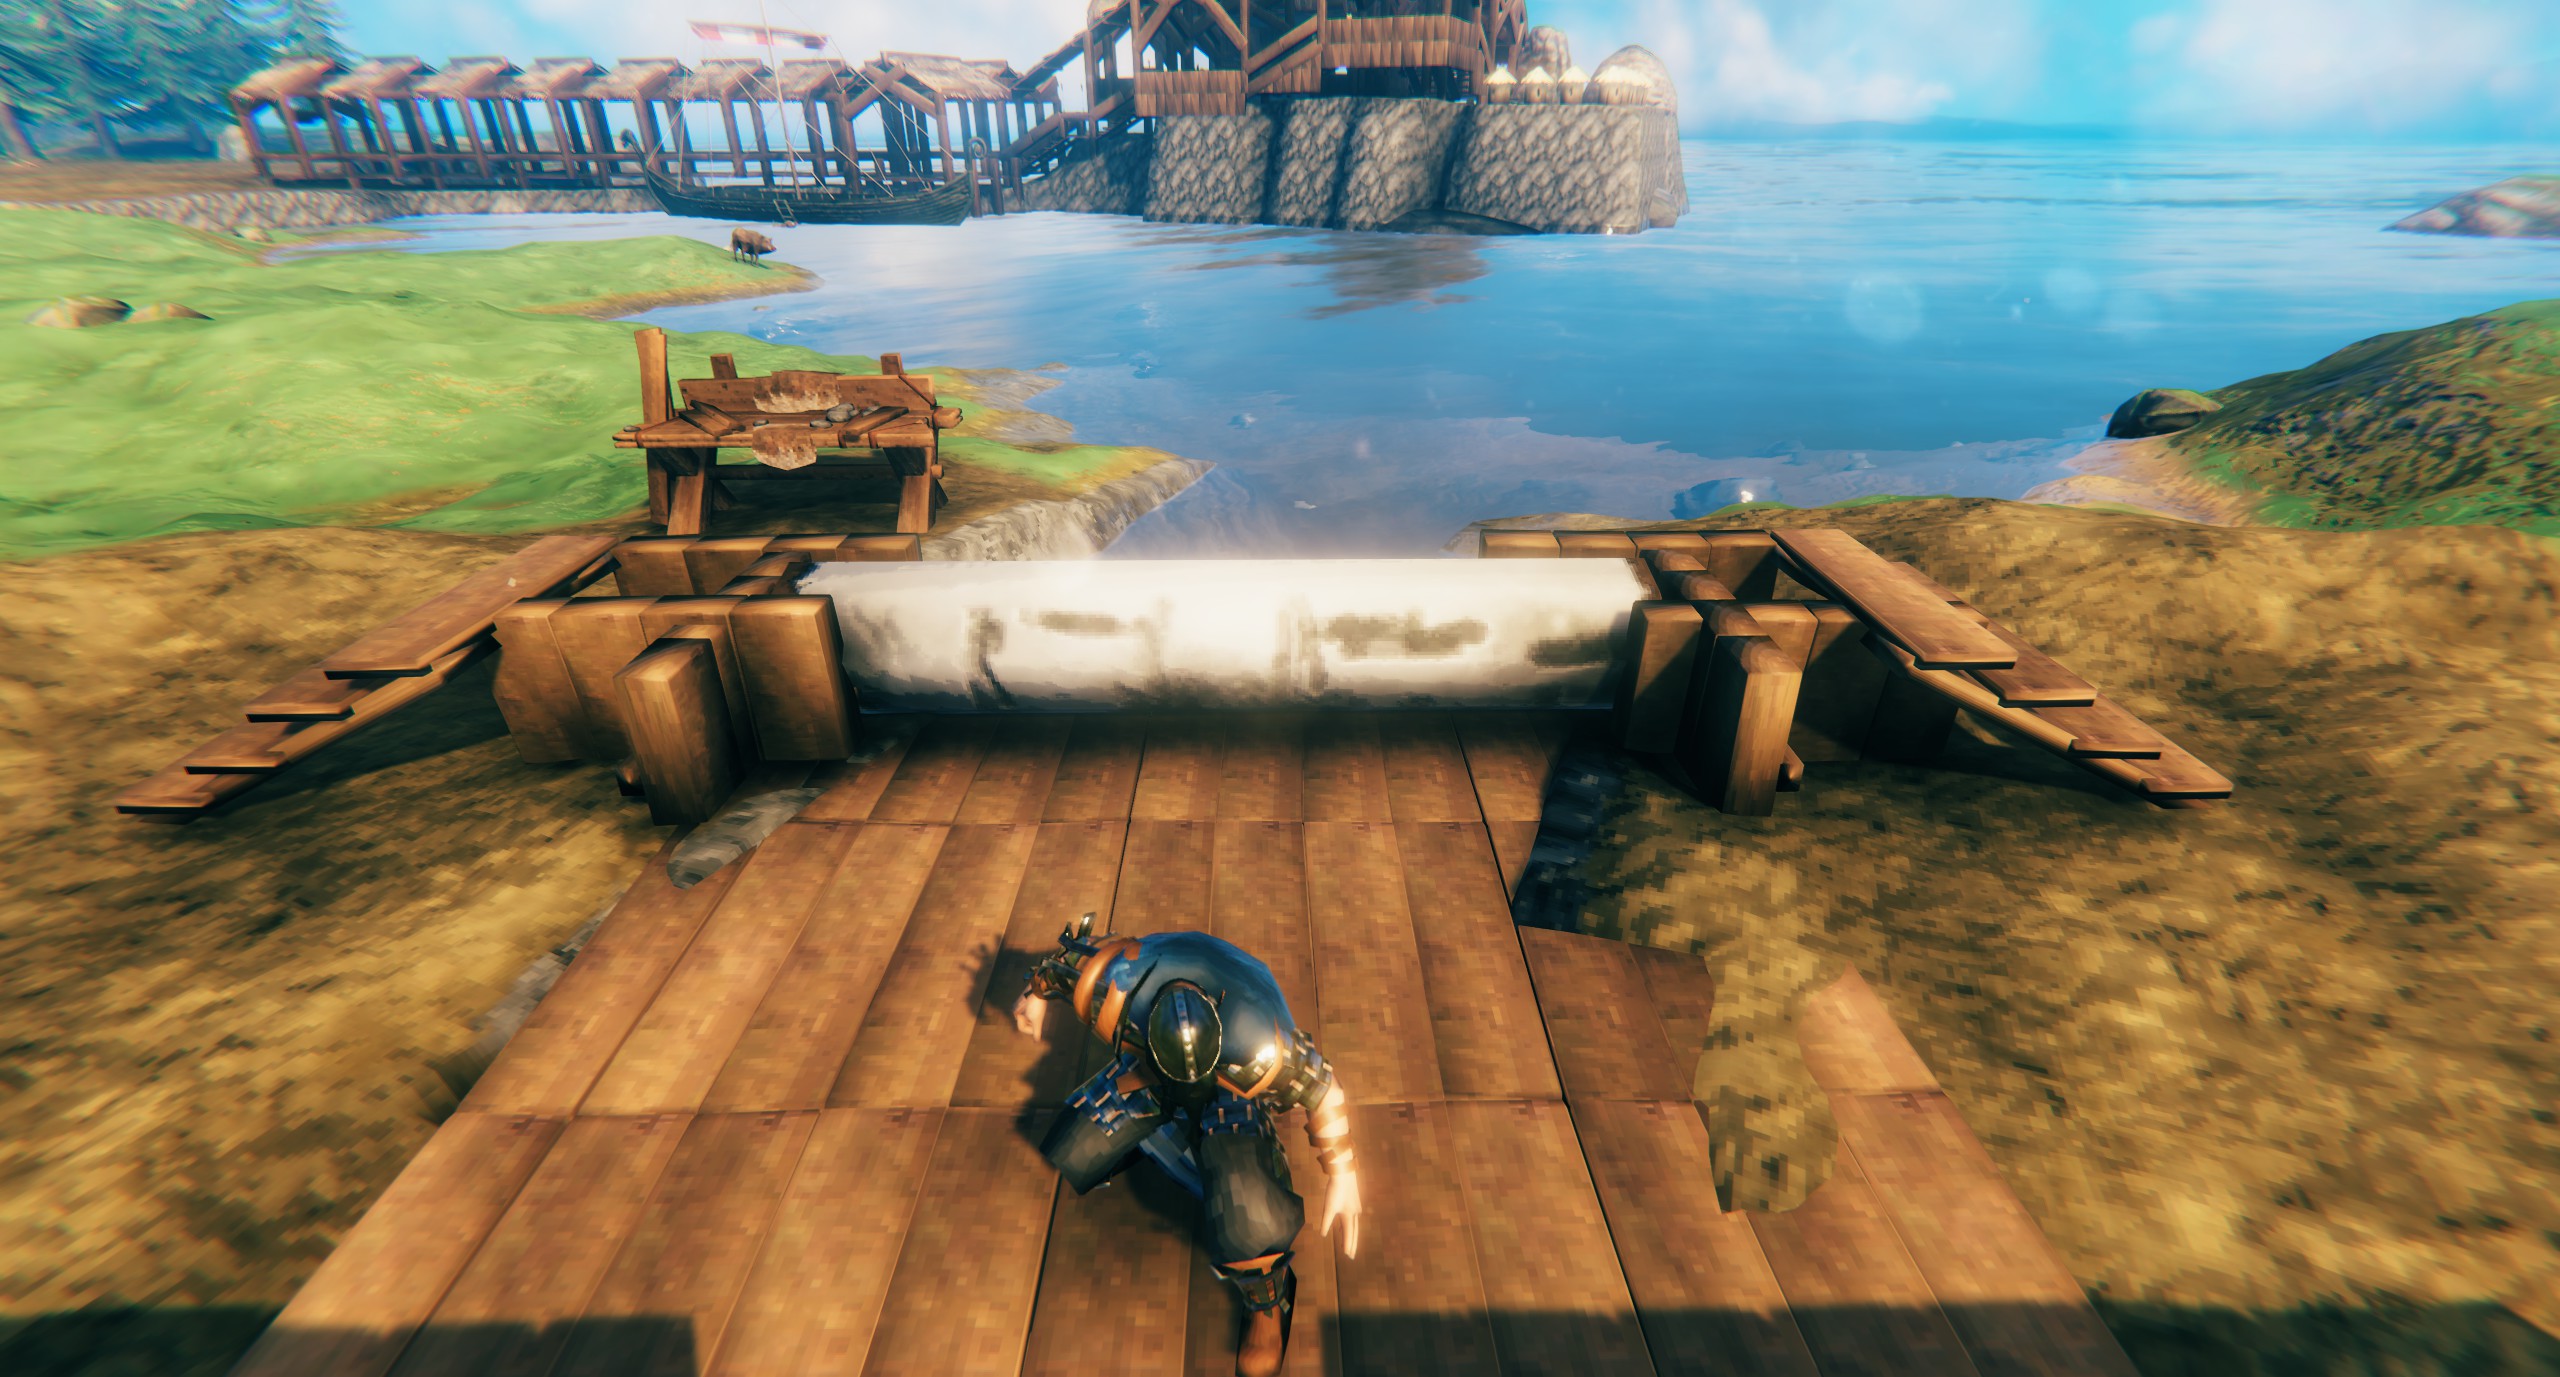 Valheim - A Bridge that mobs cannot cross! For great Castles!